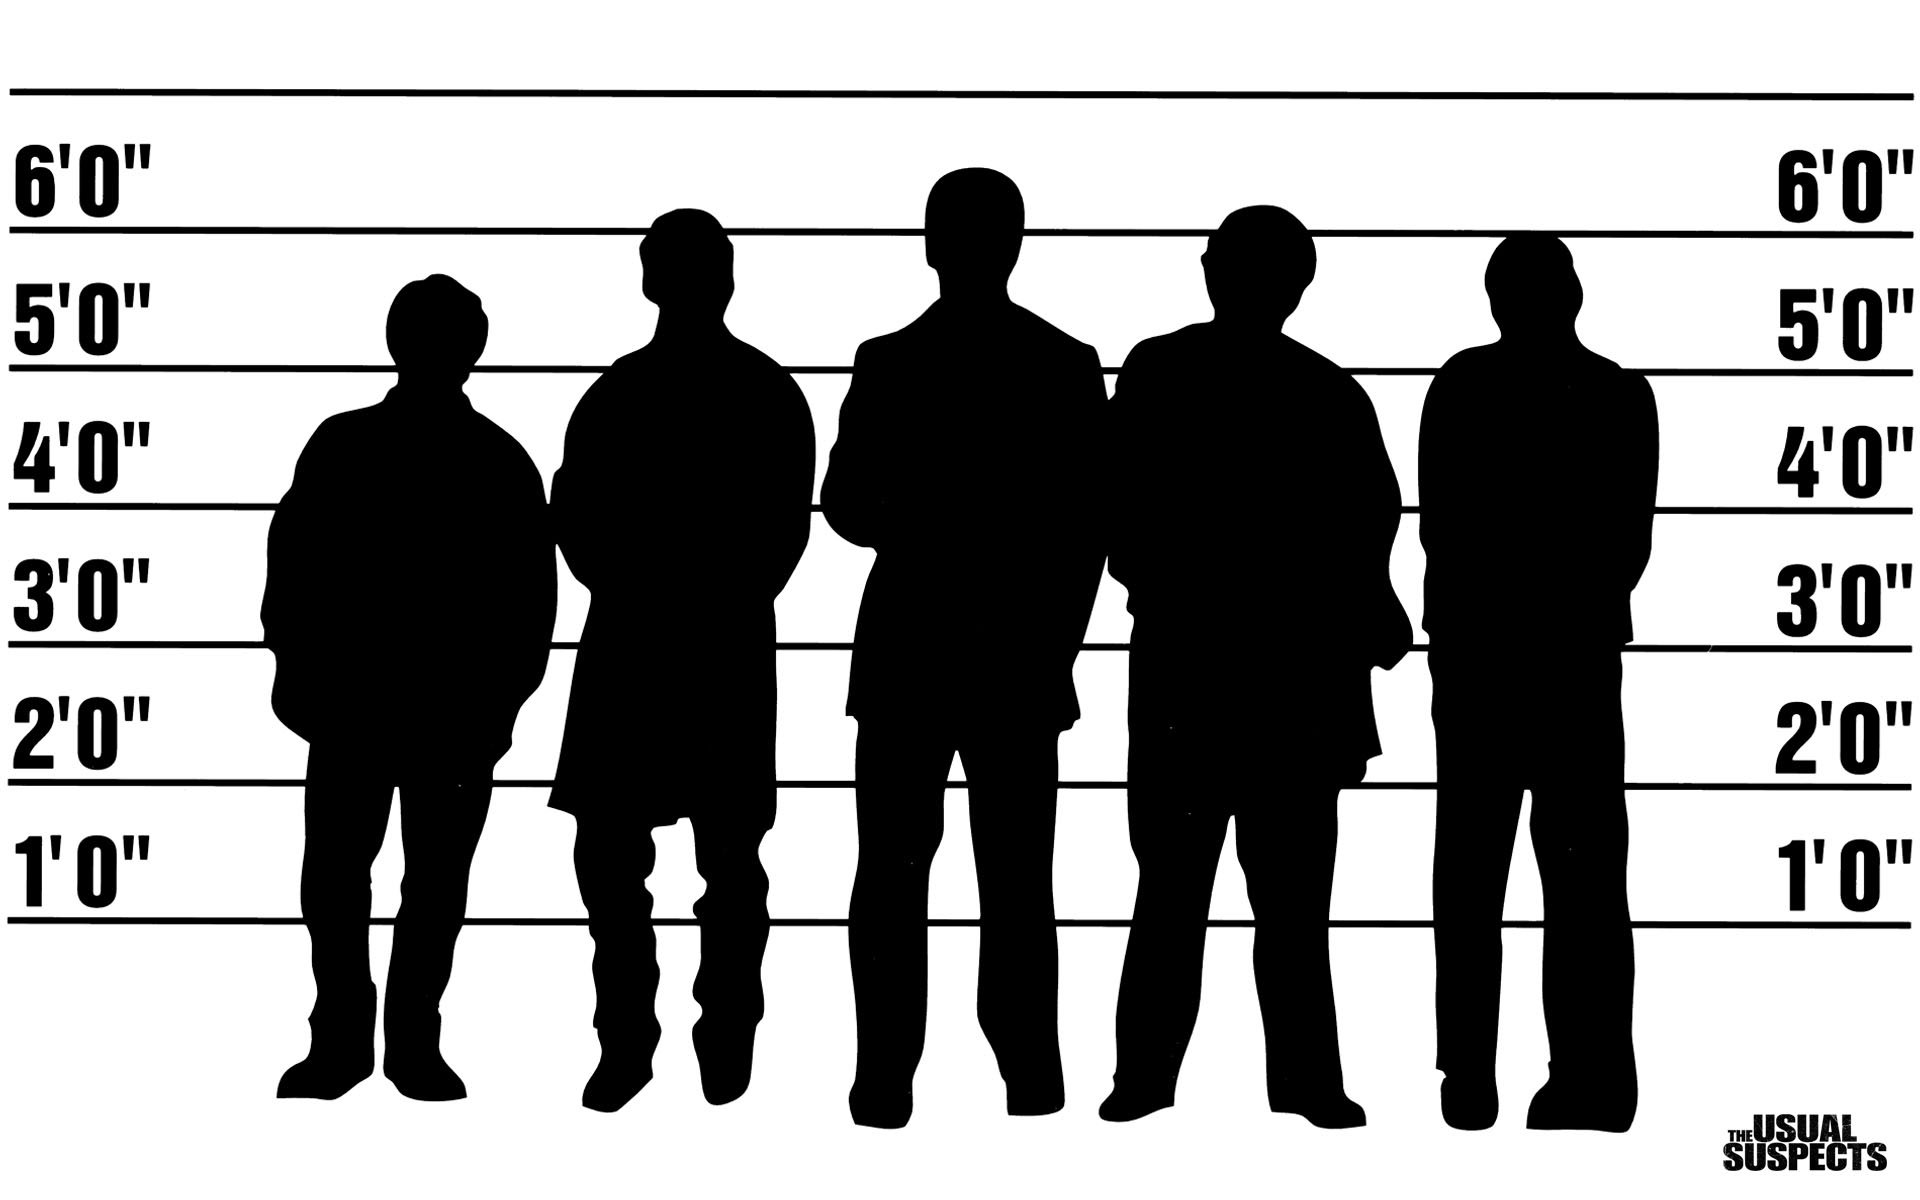 the, Usual suspects, Crime, Drama, Thriller, Mystery, Usual, Suspects Wallpaper